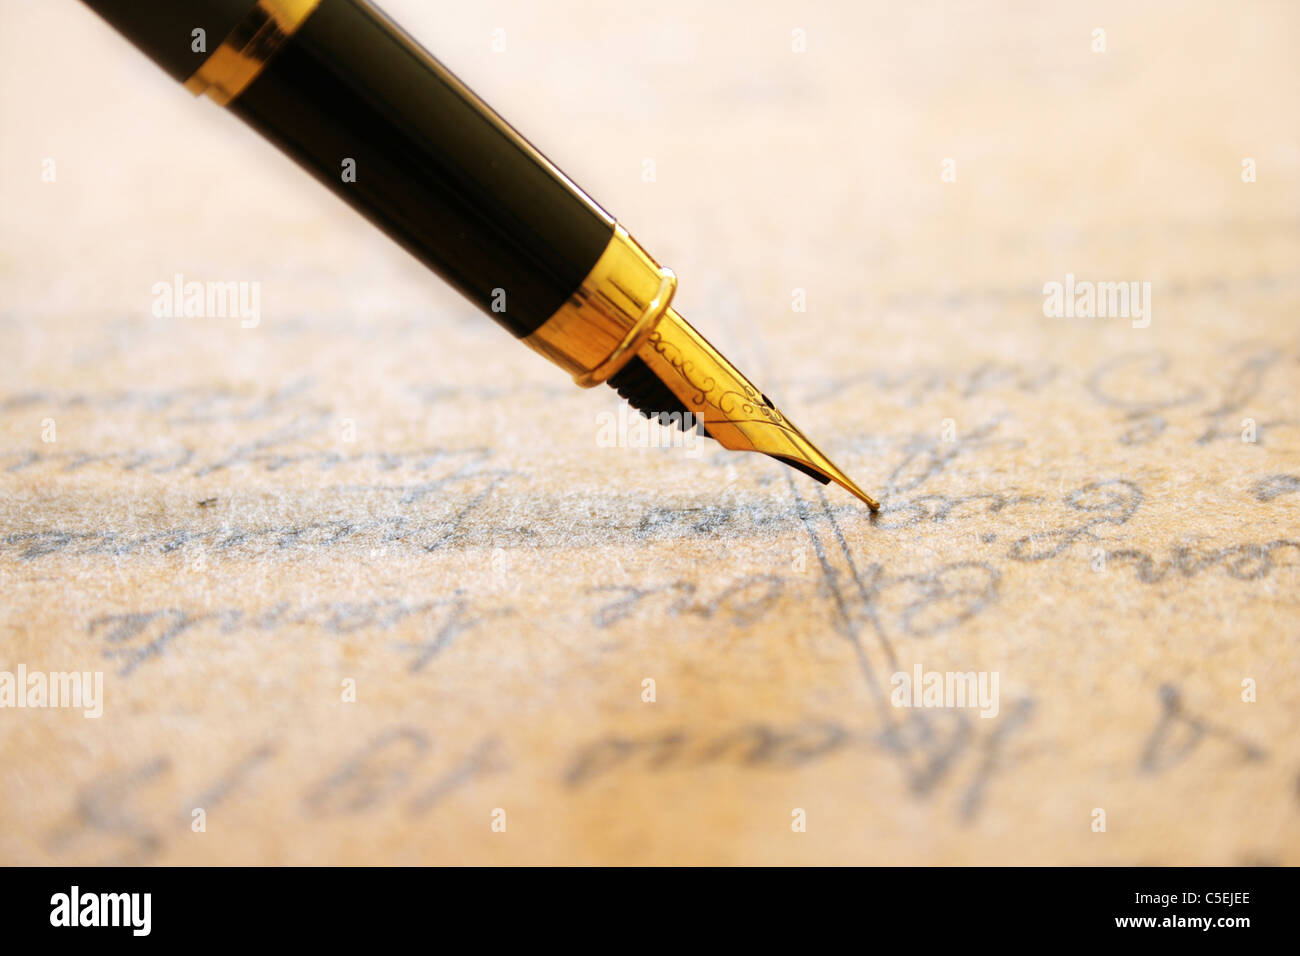 Fountain pen on old letter Stock Photo